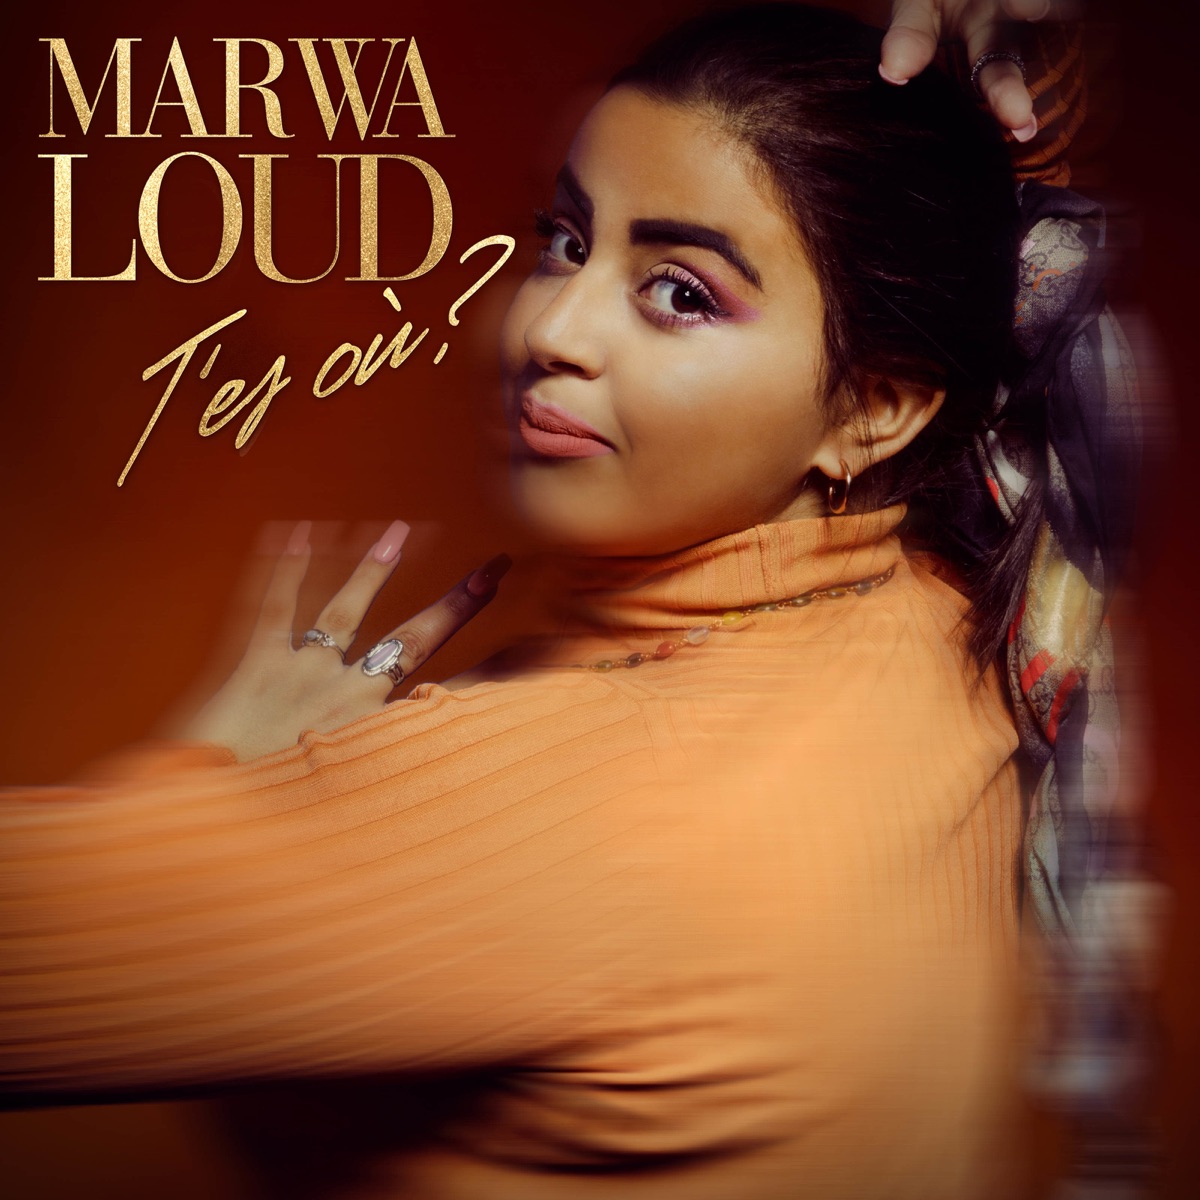 Allez les gros (feat. Naza) - Single by Marwa Loud on Apple Music